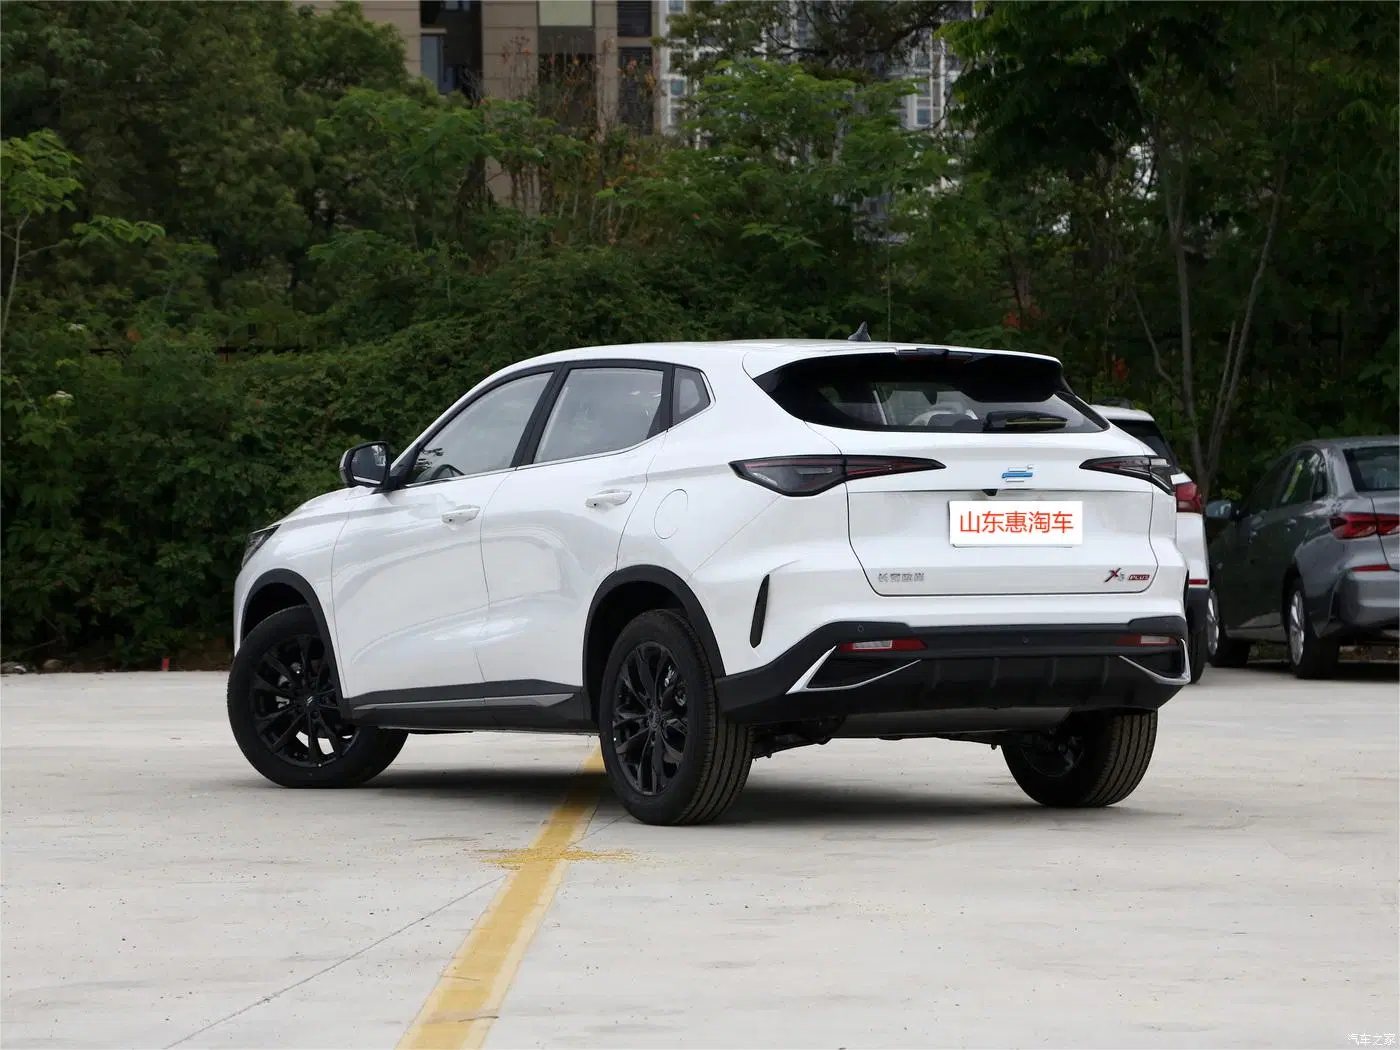 Changan Auchan X5 SUV Car Petrol Vehicle New-Used/Second-Hand Electric/EV/Battery/Green New Energy/Electrical Automobile